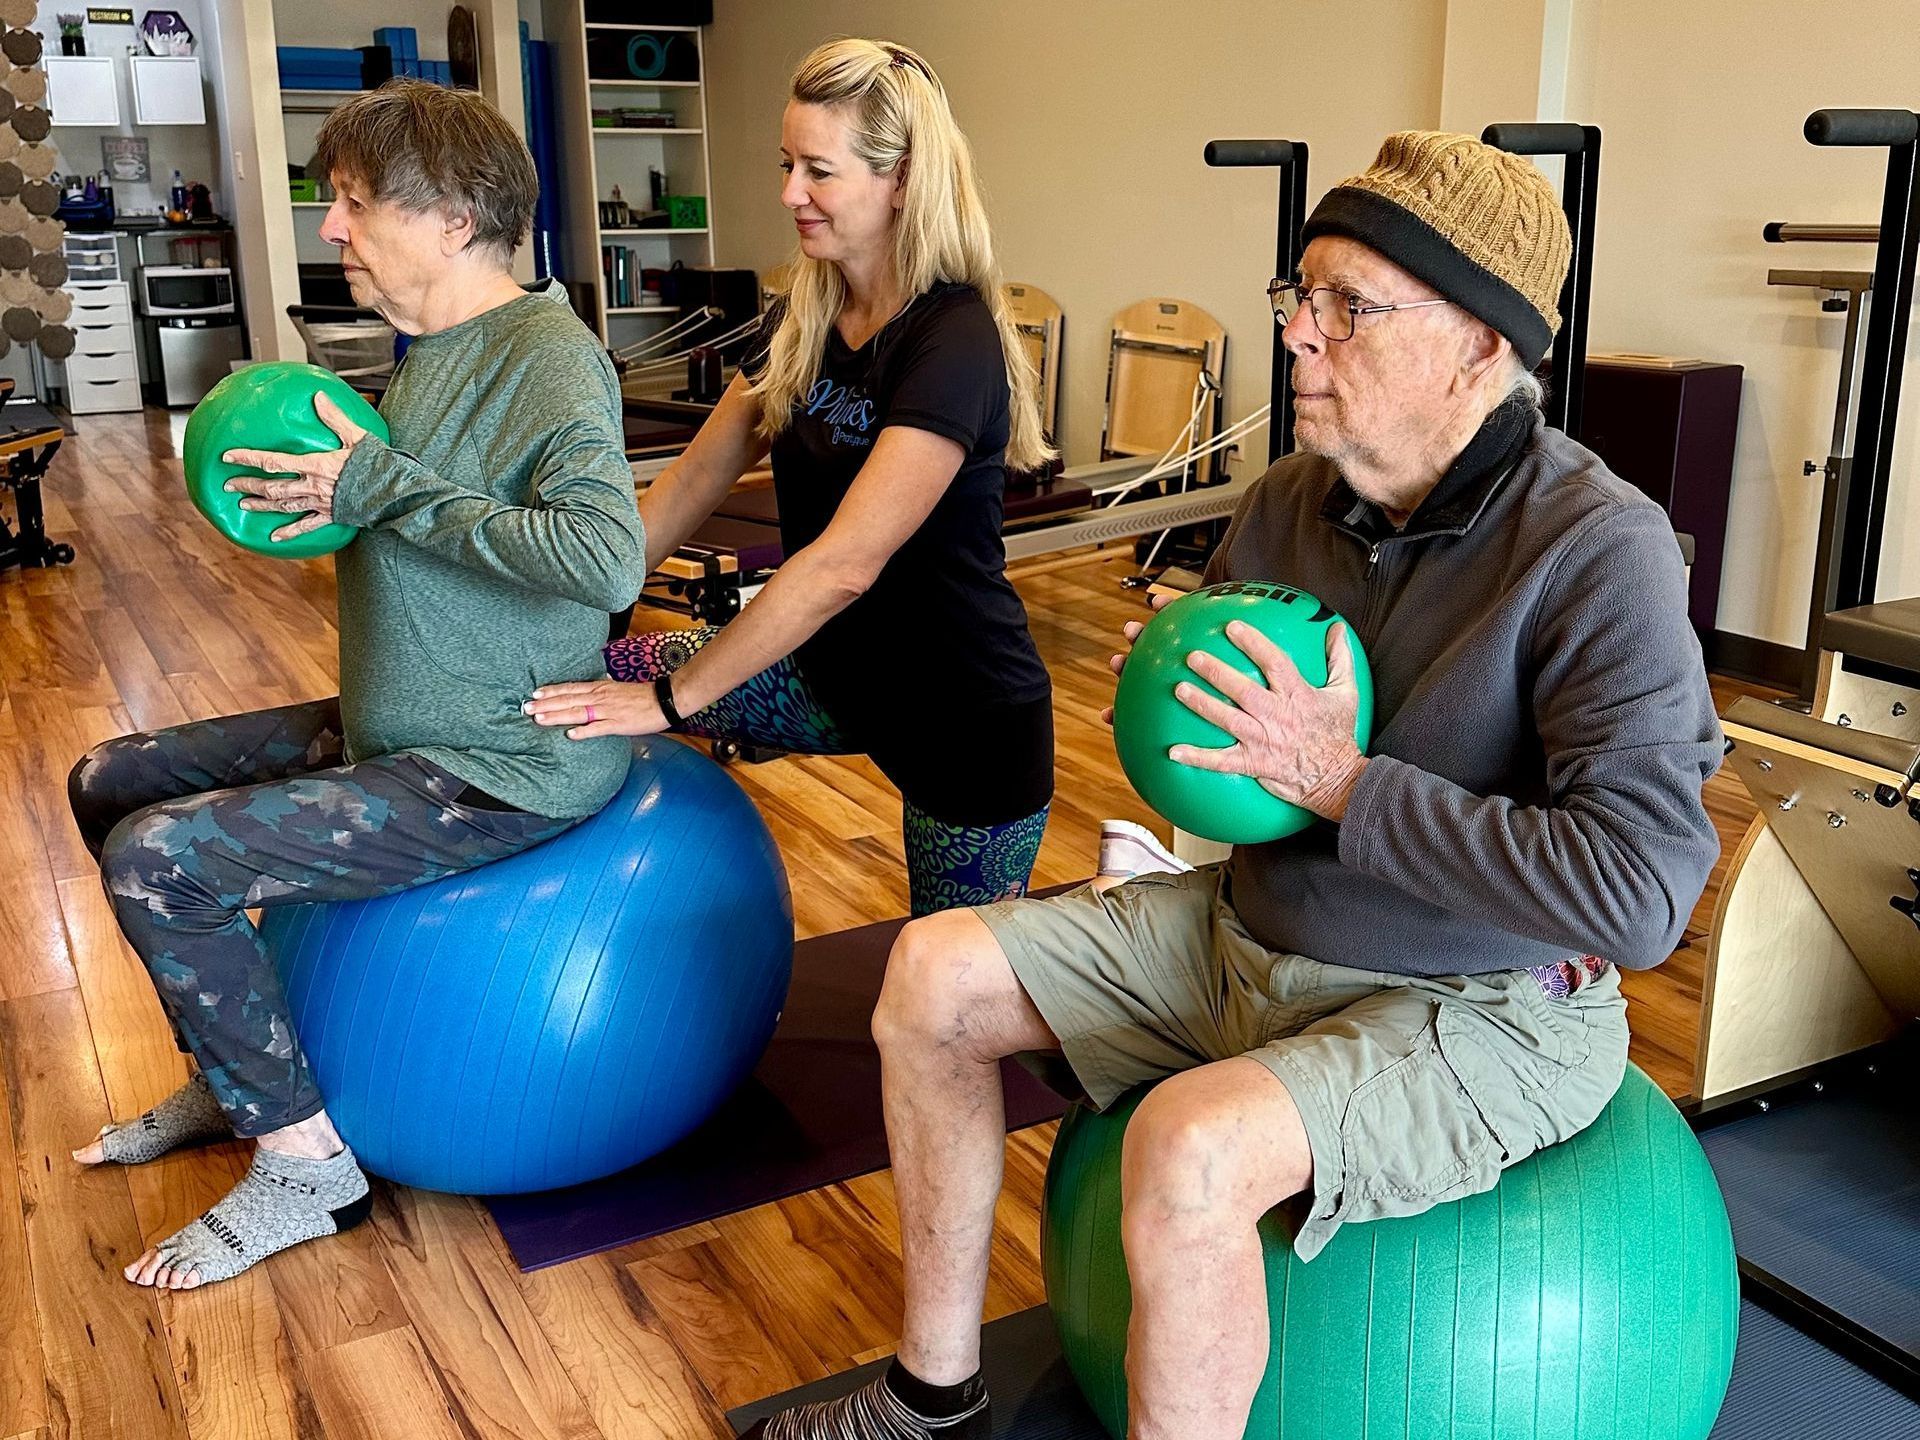 A group of people are sitting on exercise balls in a gym.